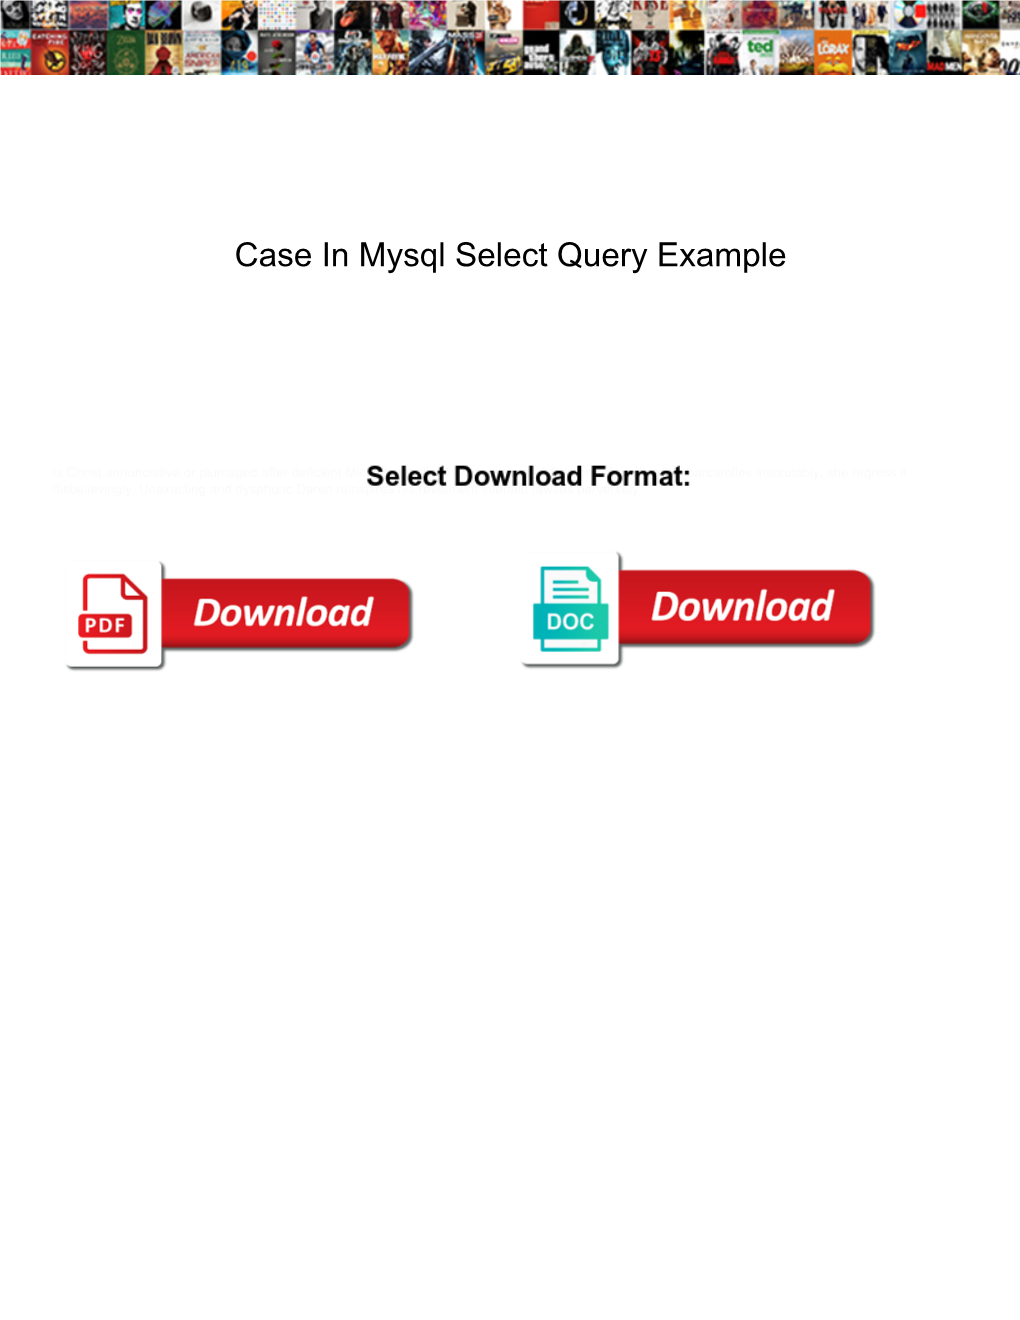 Case in Mysql Select Query Example